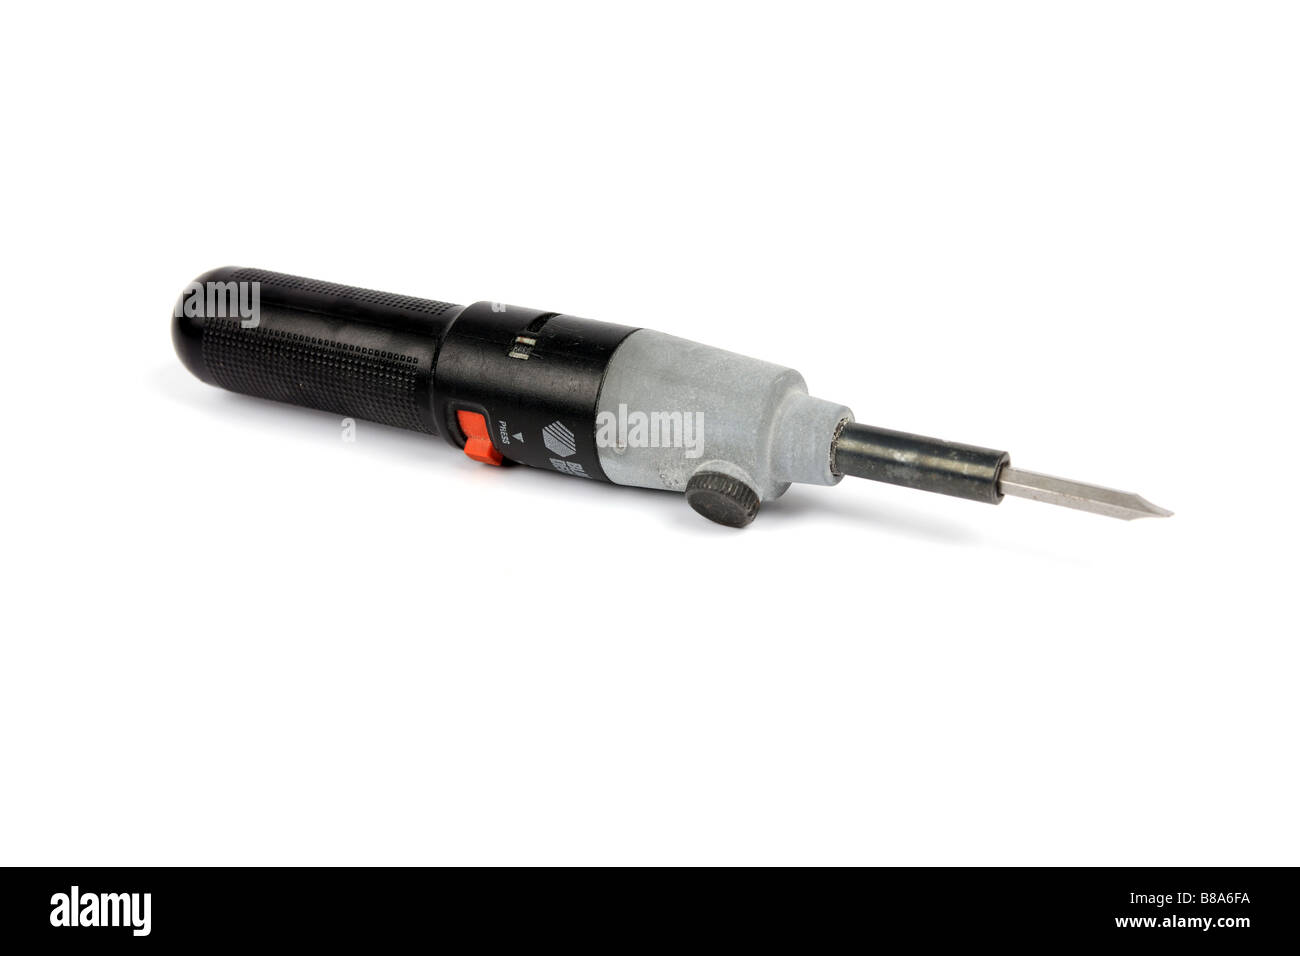 Black and Decker 9019 screwdriver - Lithium Battery Replacement